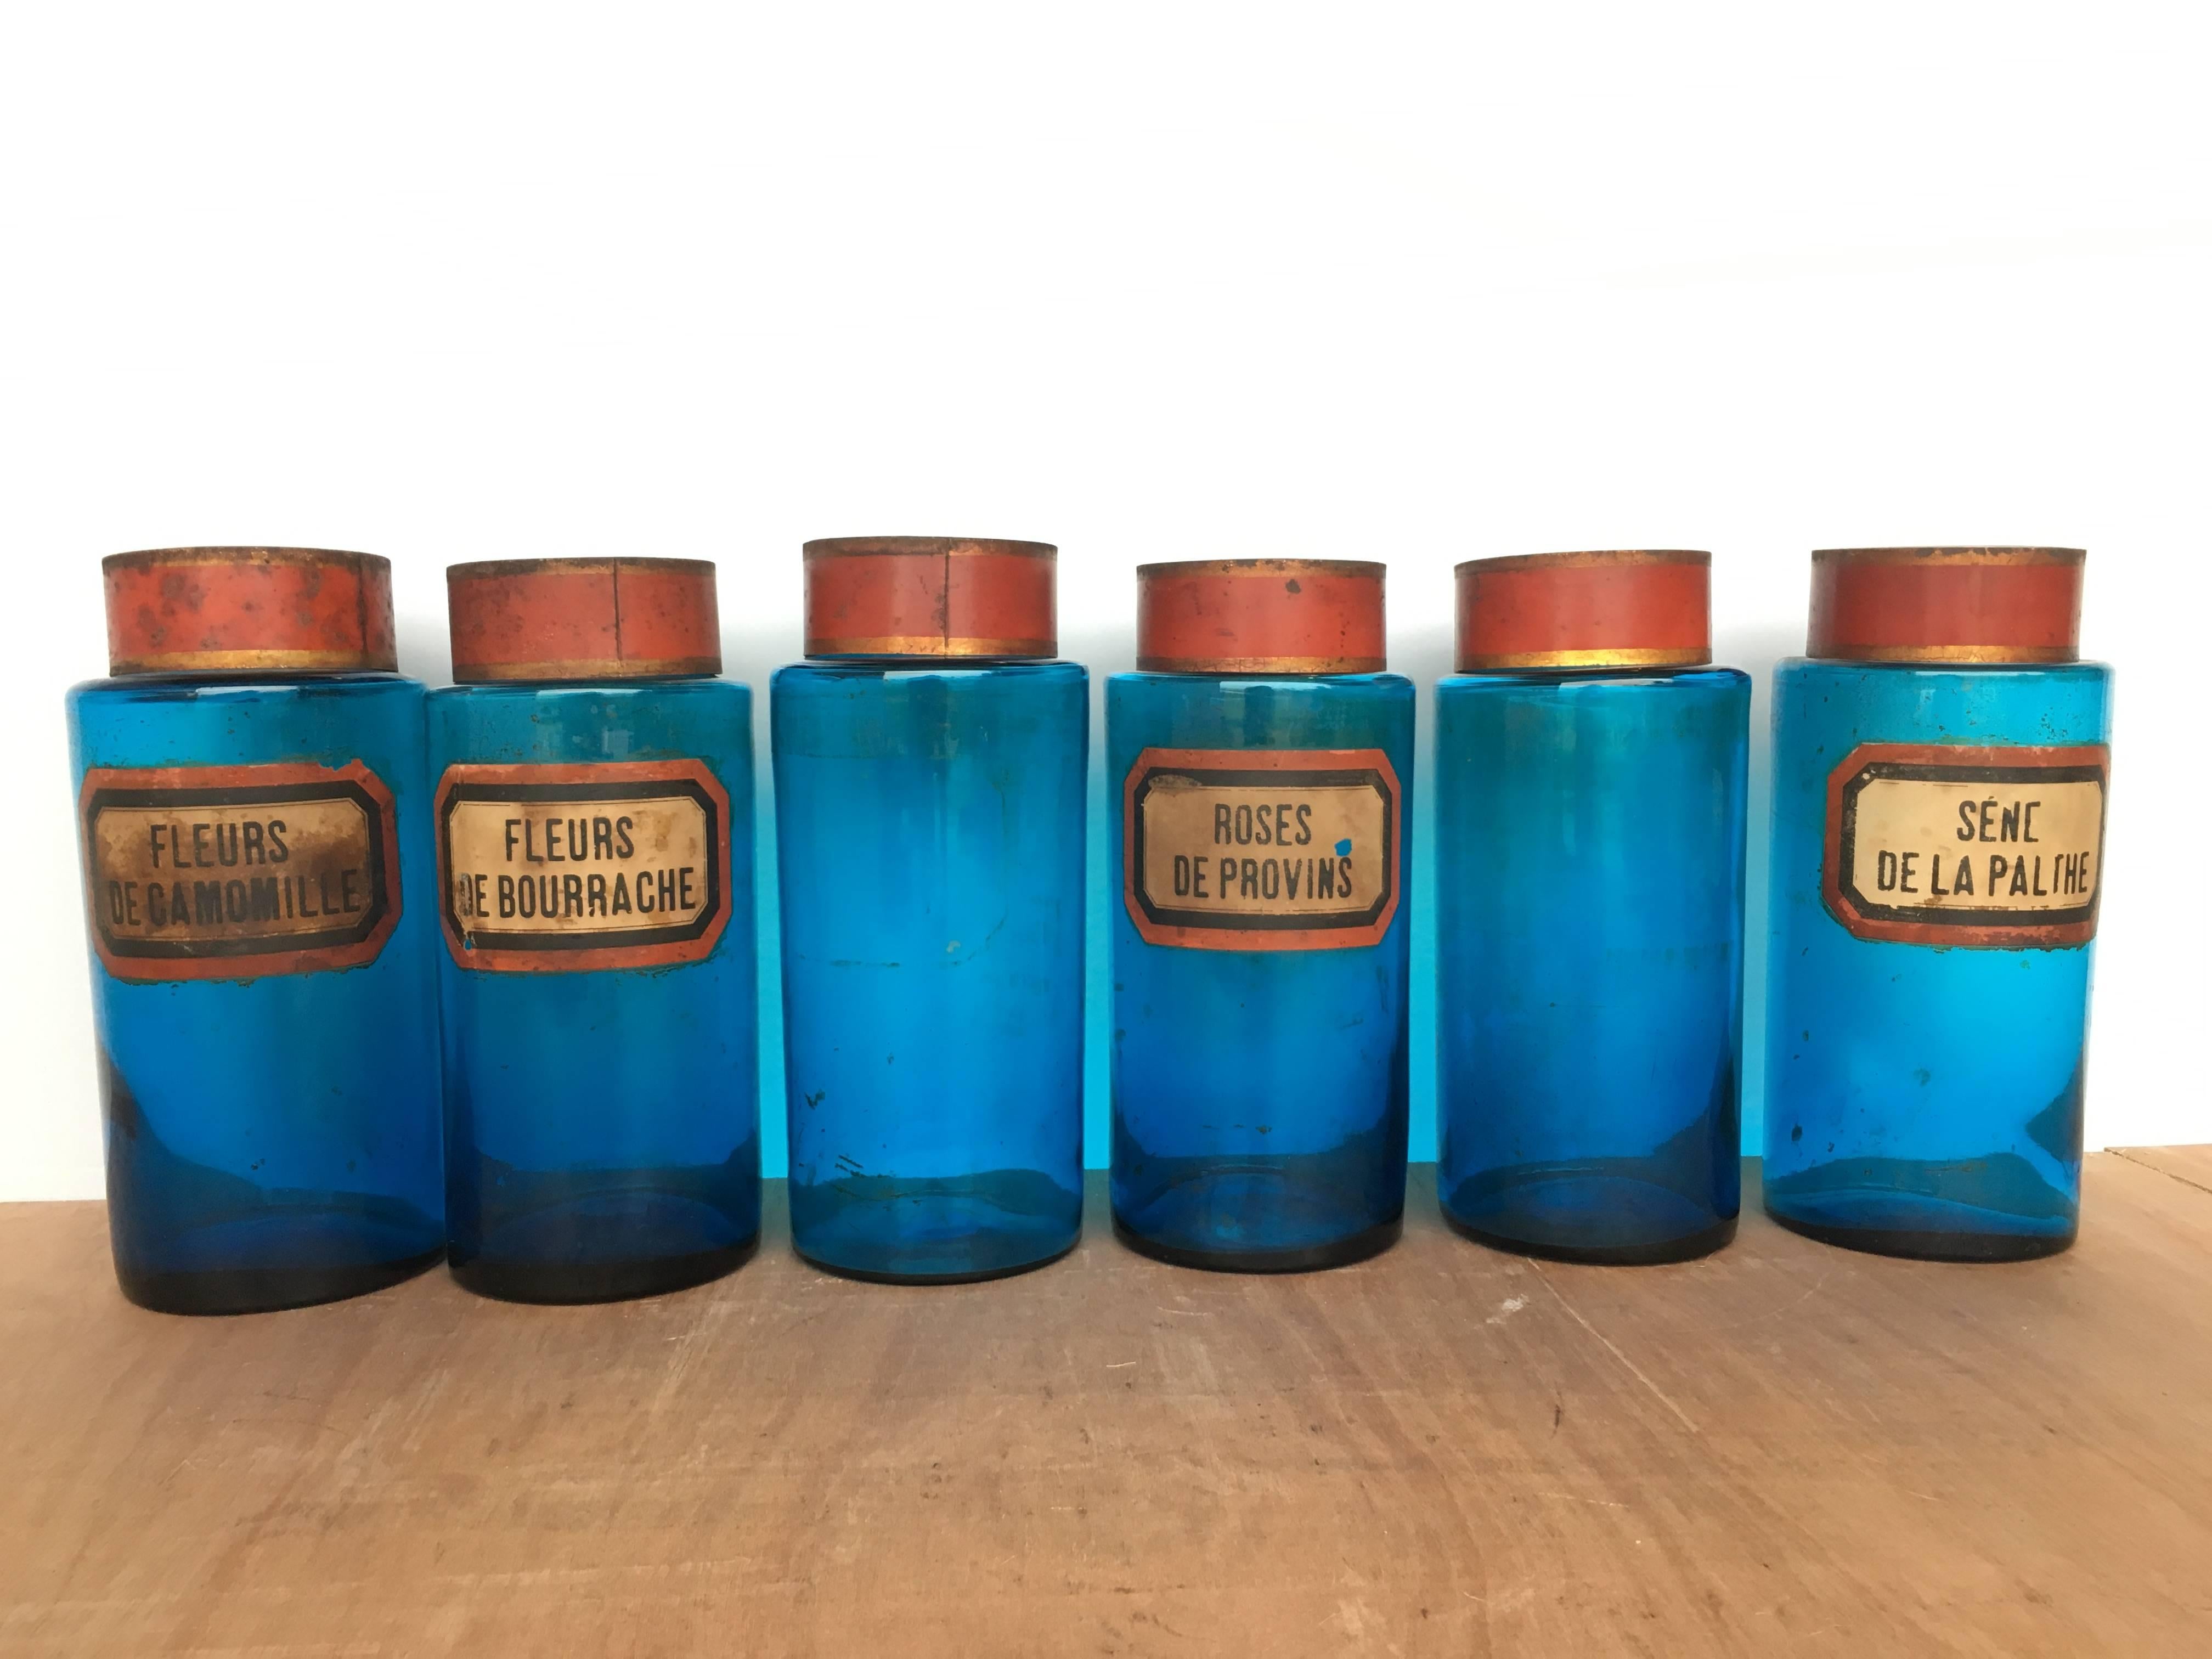 Vintage French apothecary jars. Blue glass is a cerulean color. Late 19th century or early 20th century. 

Priced for set of six; please inquire regarding availability of individual jars. 